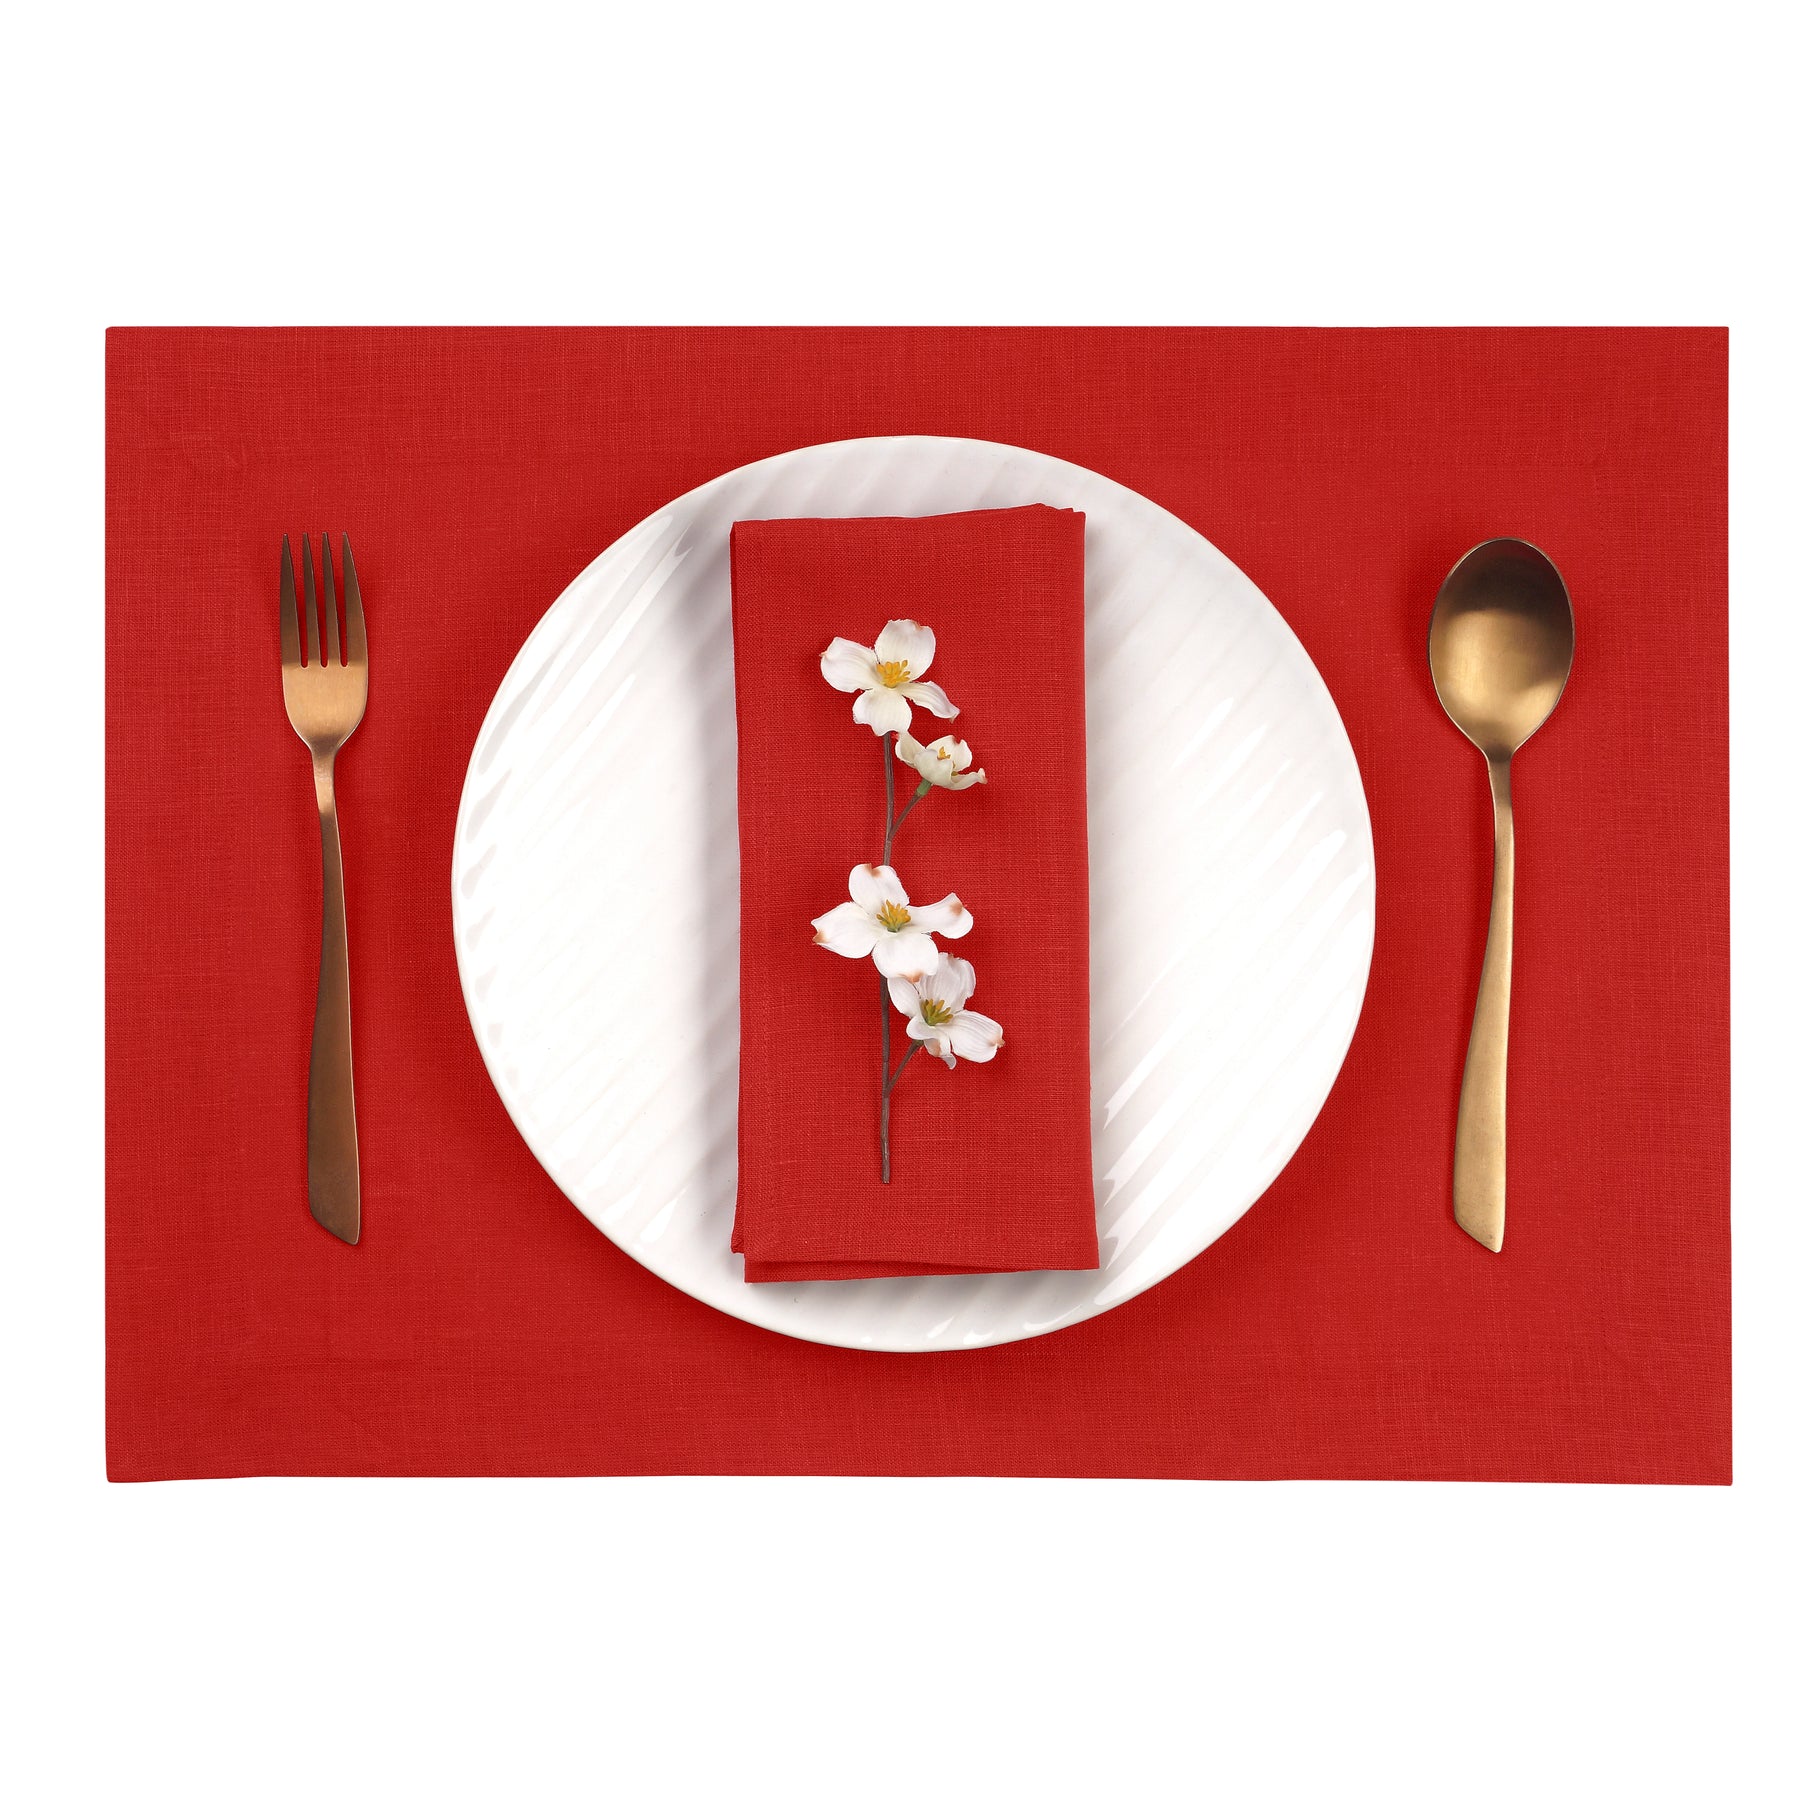 Bright Red Linen Placemats 14 x 19 Inch Set of 4 - Hemmed